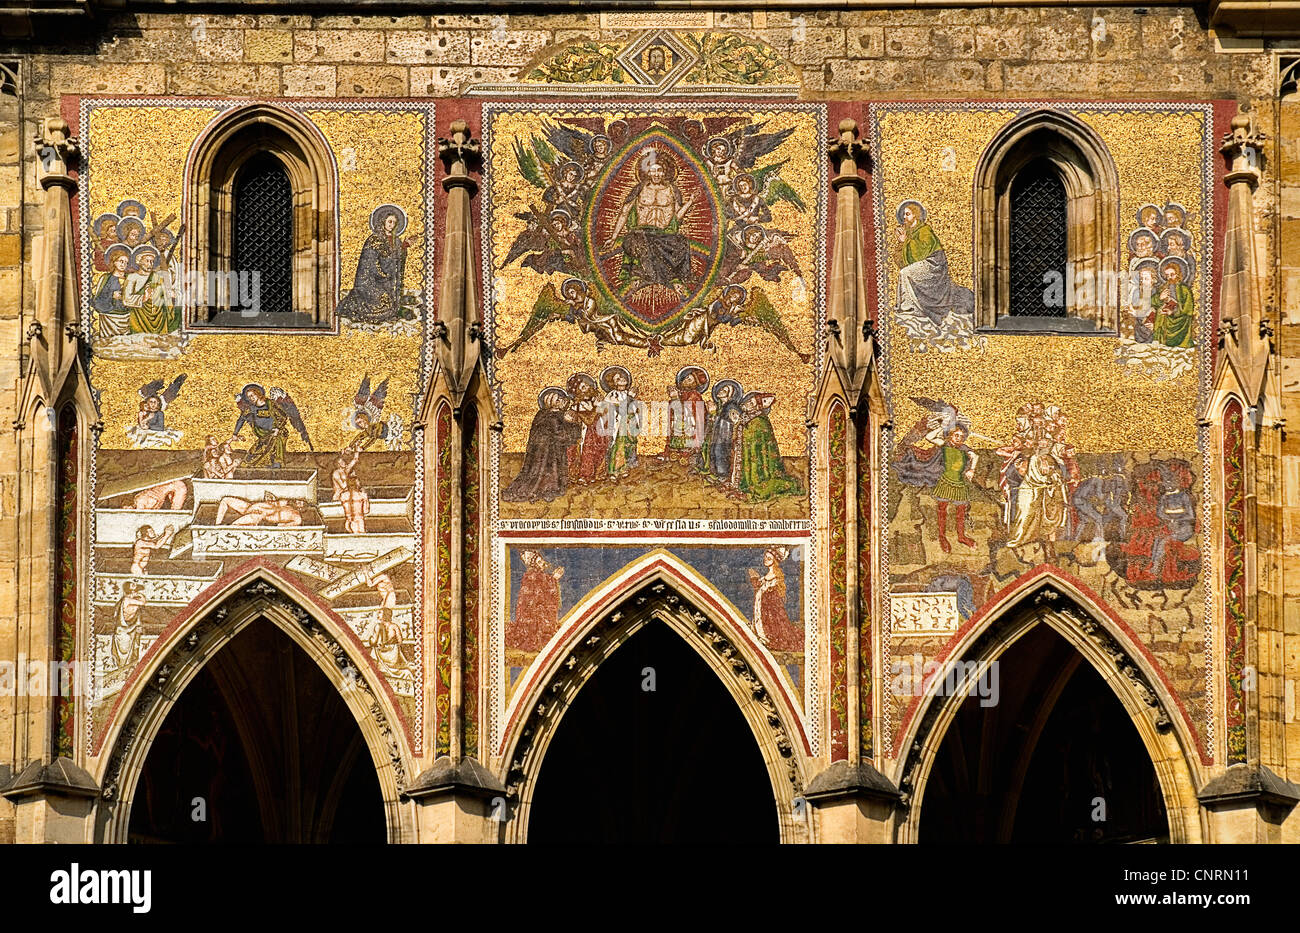 Prague St Vitus Cathedral Golden Gate and Mosaic of the Last Judgement. Stock Photo